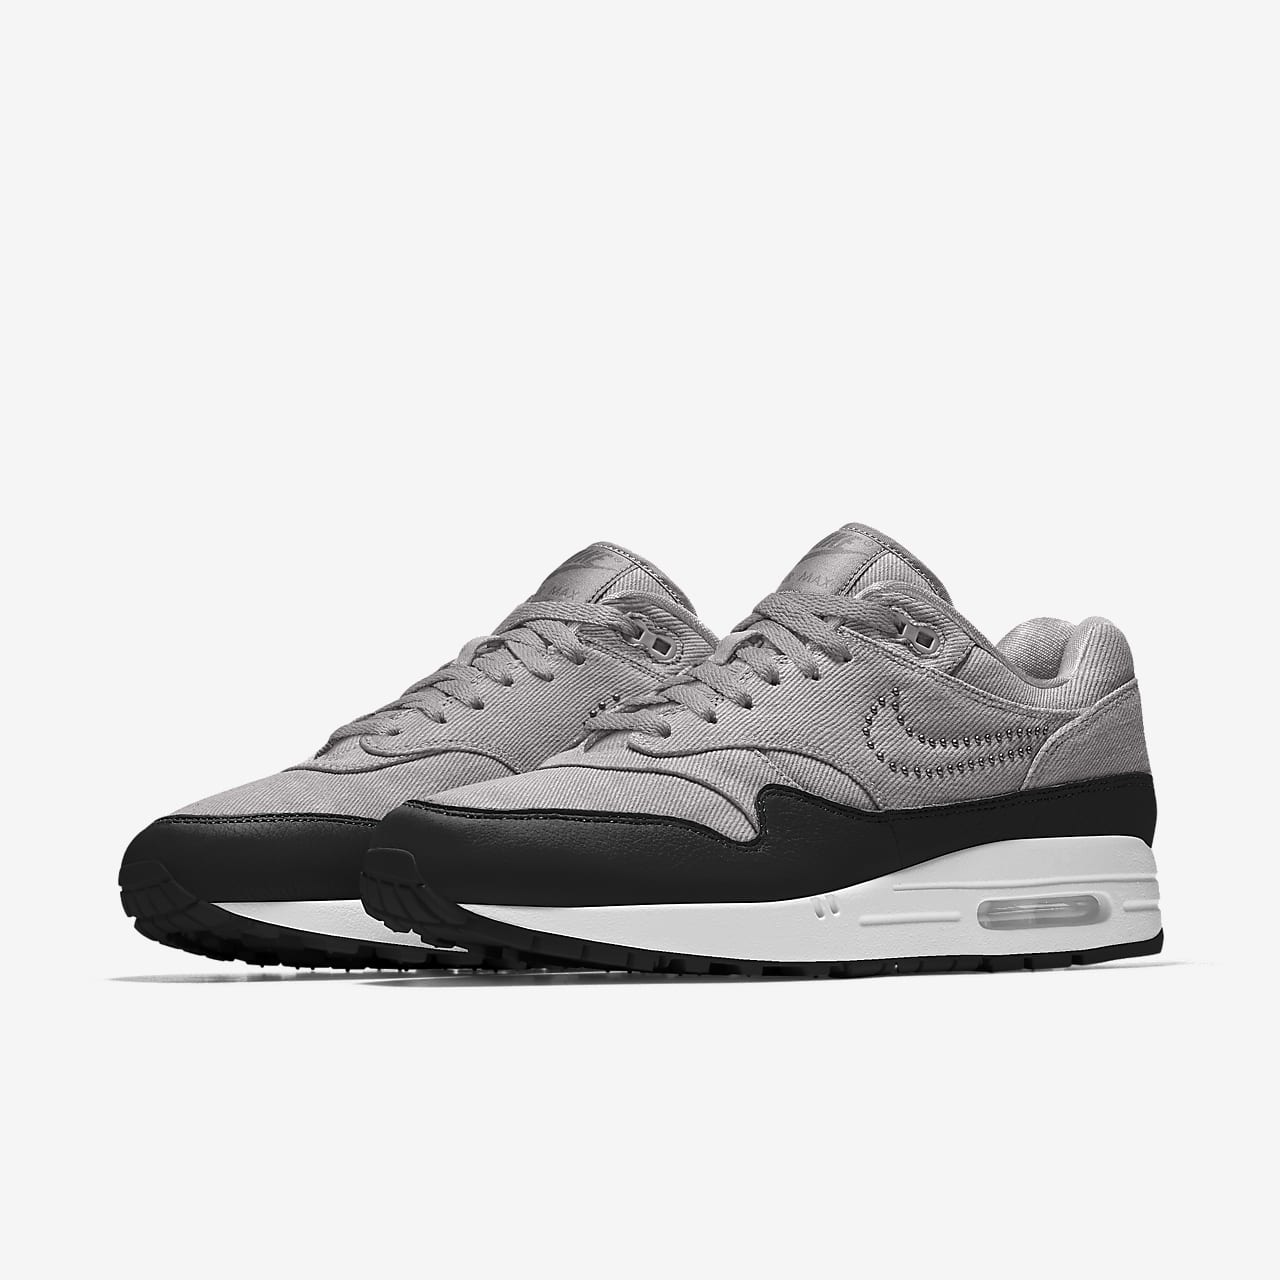 nike by you air max 1